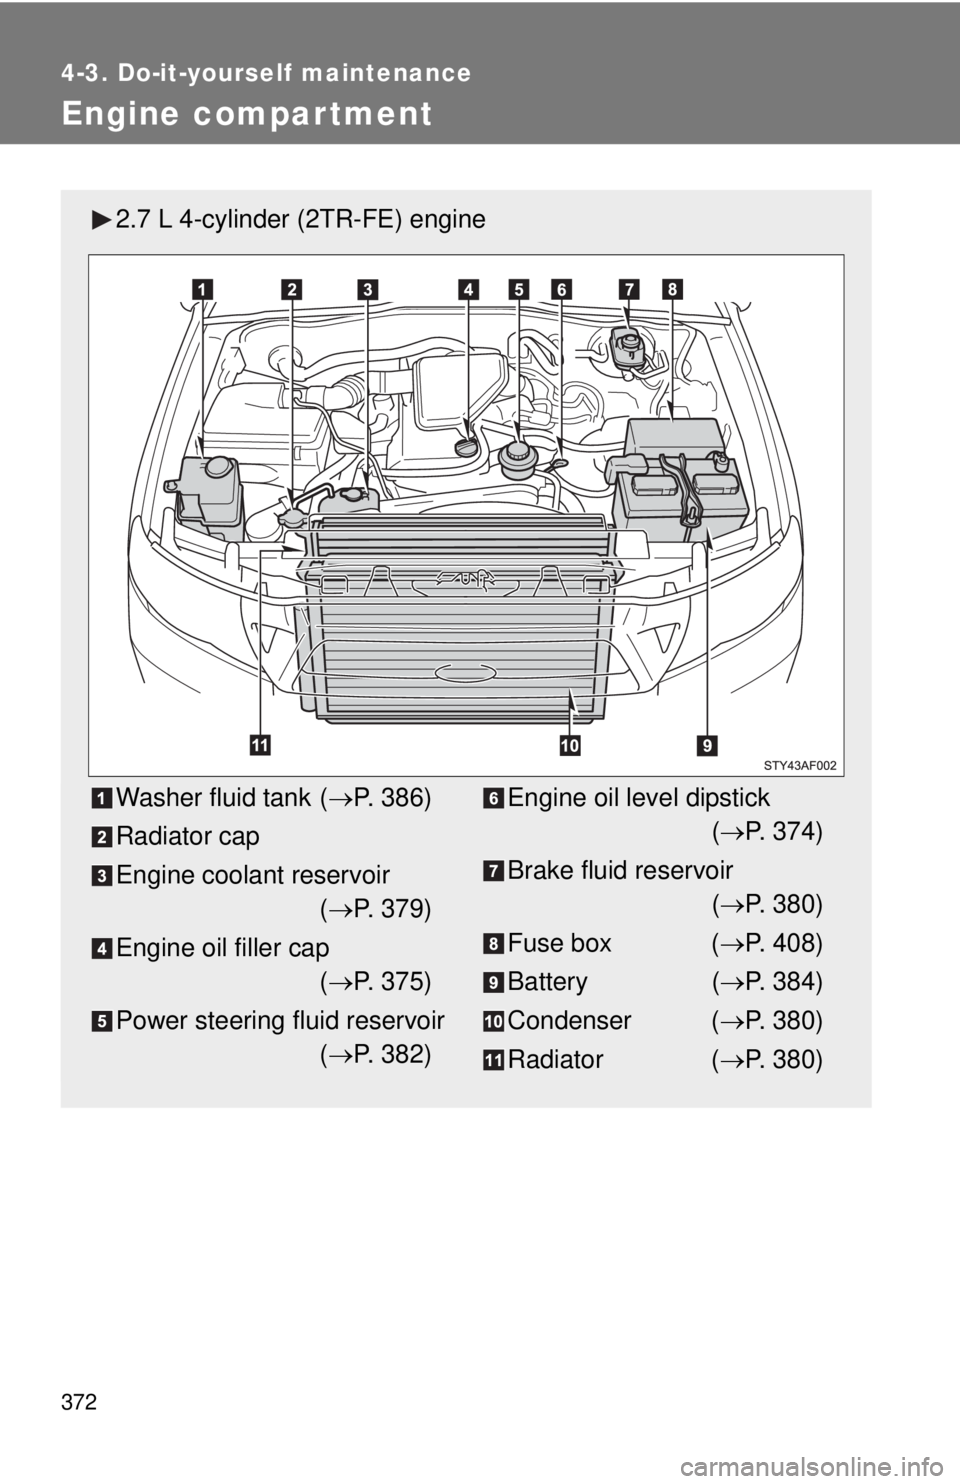 TOYOTA TACOMA 2011  Owners Manual (in English) 372
4-3. Do-it-yourself maintenance
Engine compar tment
2.7 L 4-cylinder (2TR-FE) engine
Washer fluid tank (P. 386)
Radiator cap
Engine coolant reservoir ( P. 379)
Engine oil filler cap ( P. 